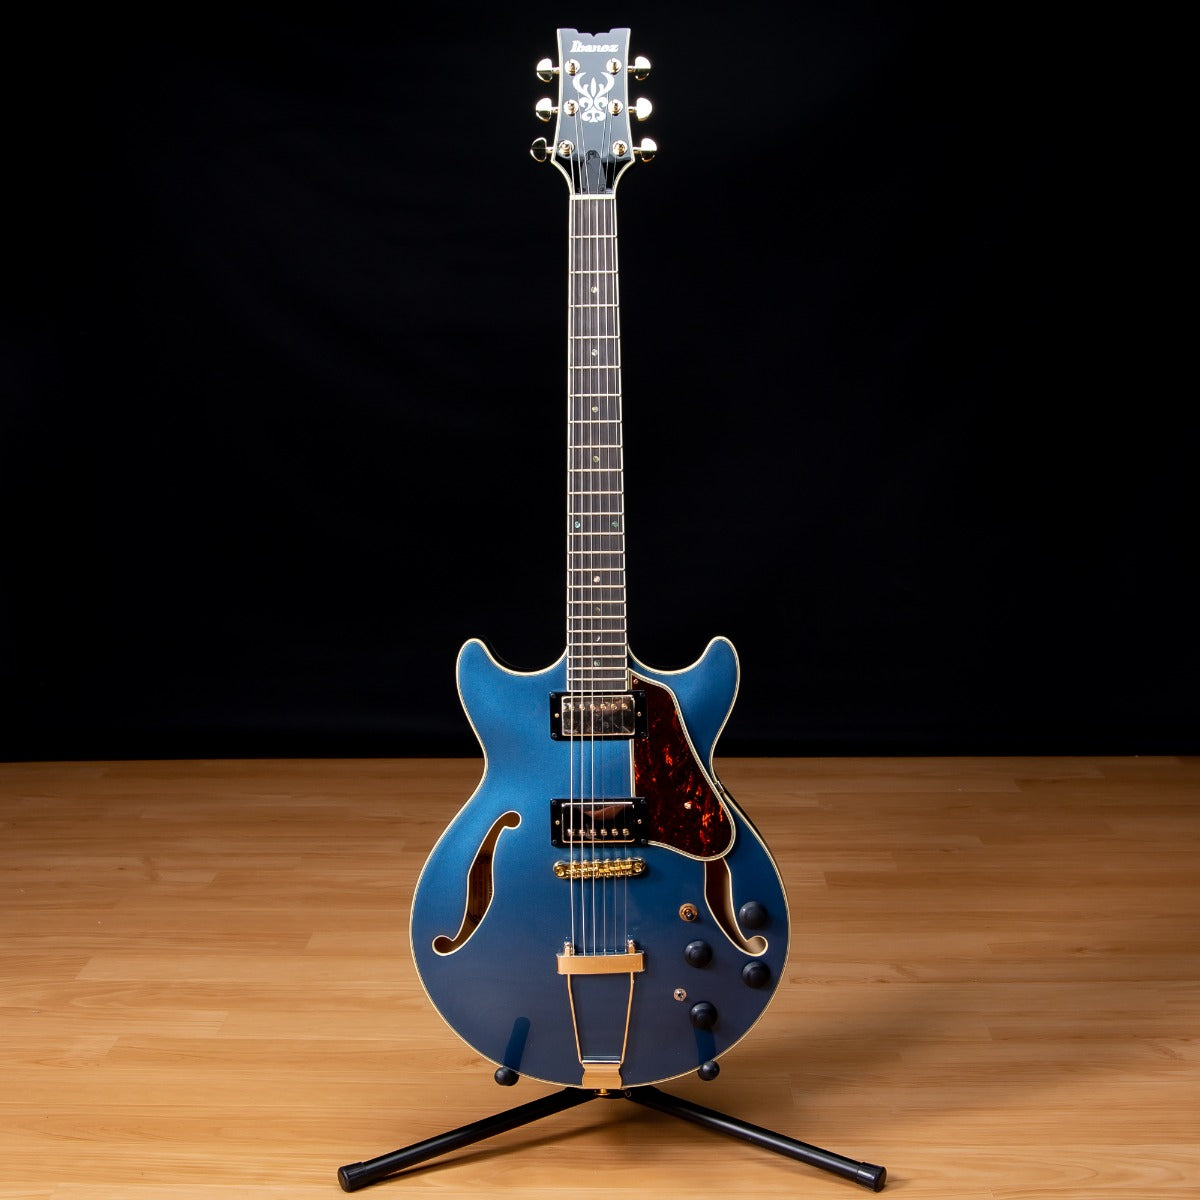 Ibanez AMH90 AM Artcore Expressionist Semi-Hollow Electric Guitar - Prussian Blue Metallic view 2